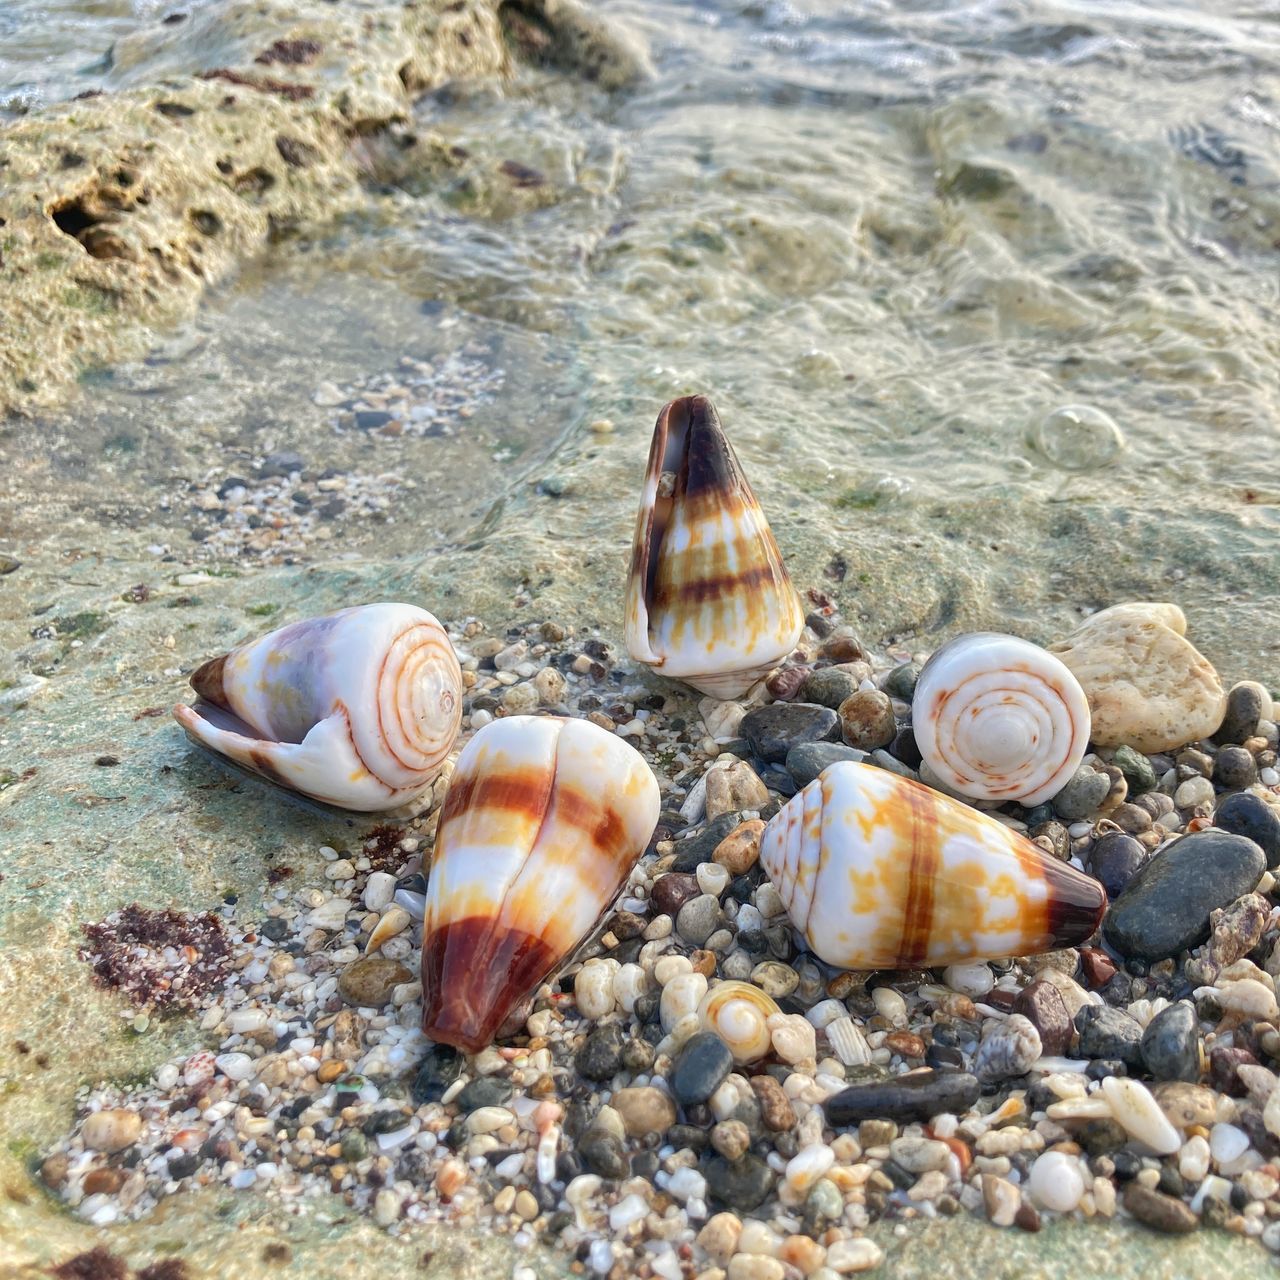 shell, beach, animal wildlife, animal shell, land, sea, water, animal, nature, seashell, wildlife, day, animal themes, no people, marine biology, high angle view, sand, rock, group of animals, beauty in nature, sunlight, outdoors, mollusk, stone, sea life, close-up, snail, tranquility, cockle